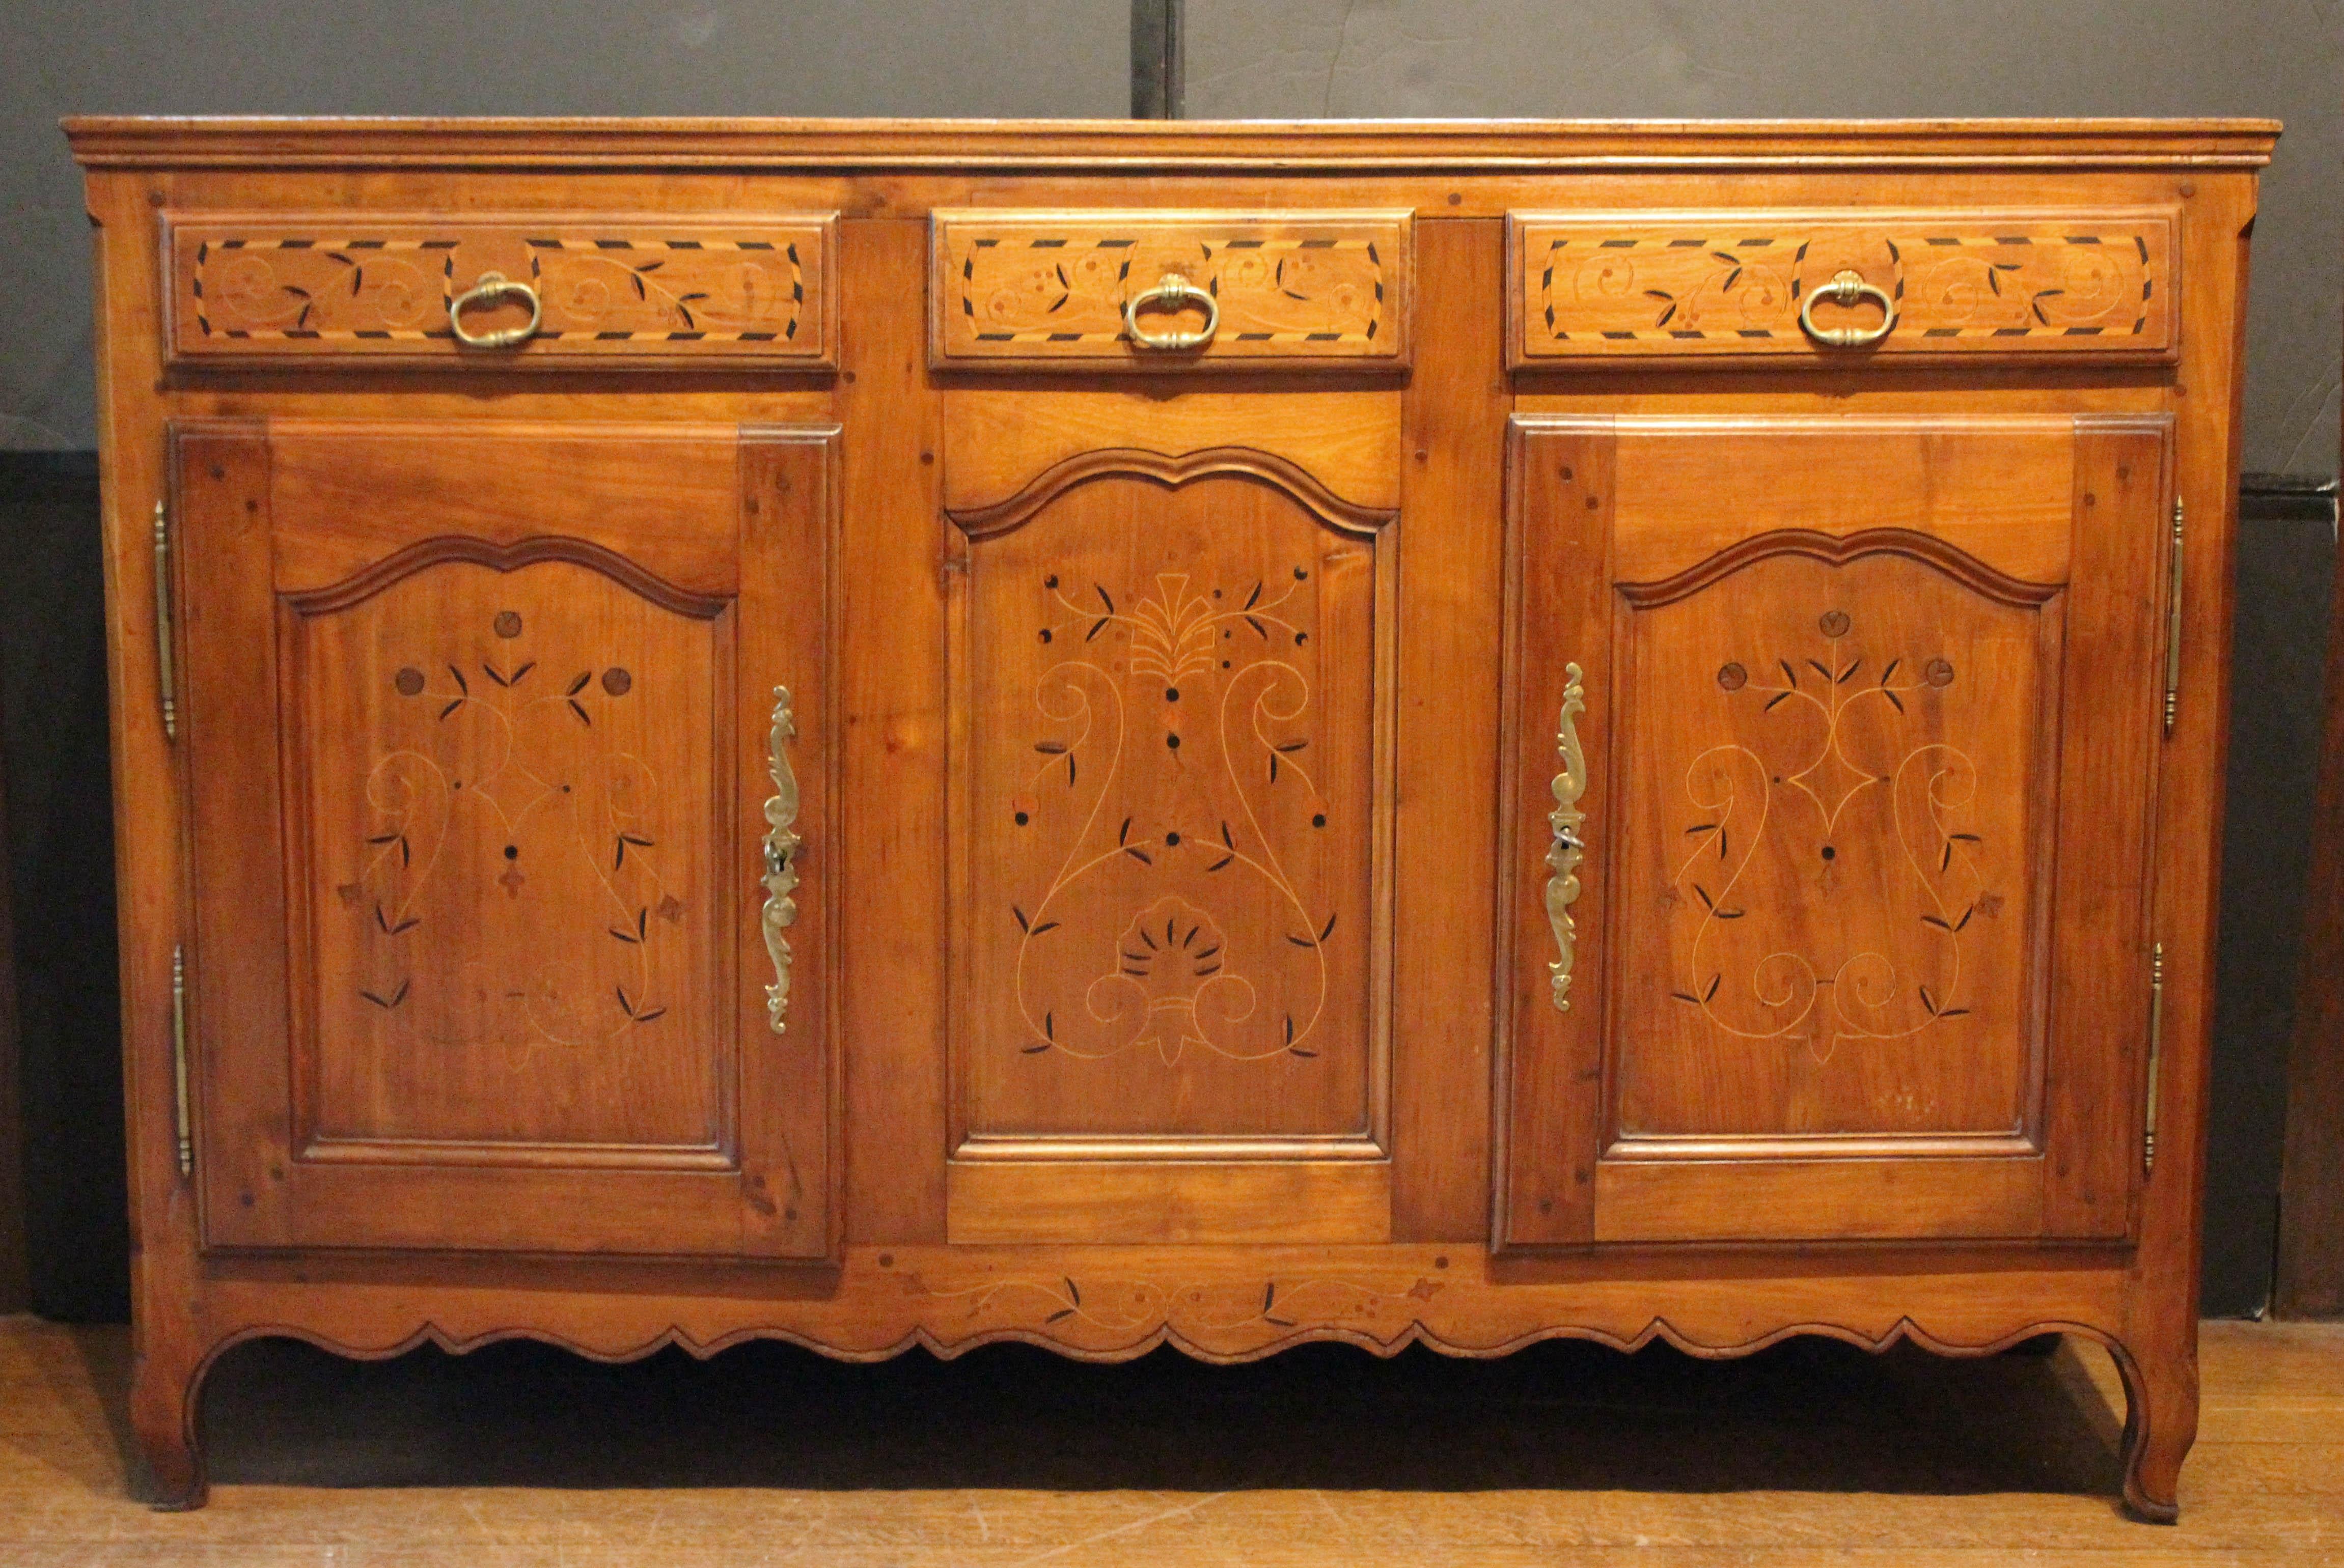 19th Century Circa 1800 Louis XV-XVI French Transitional Enfilade For Sale